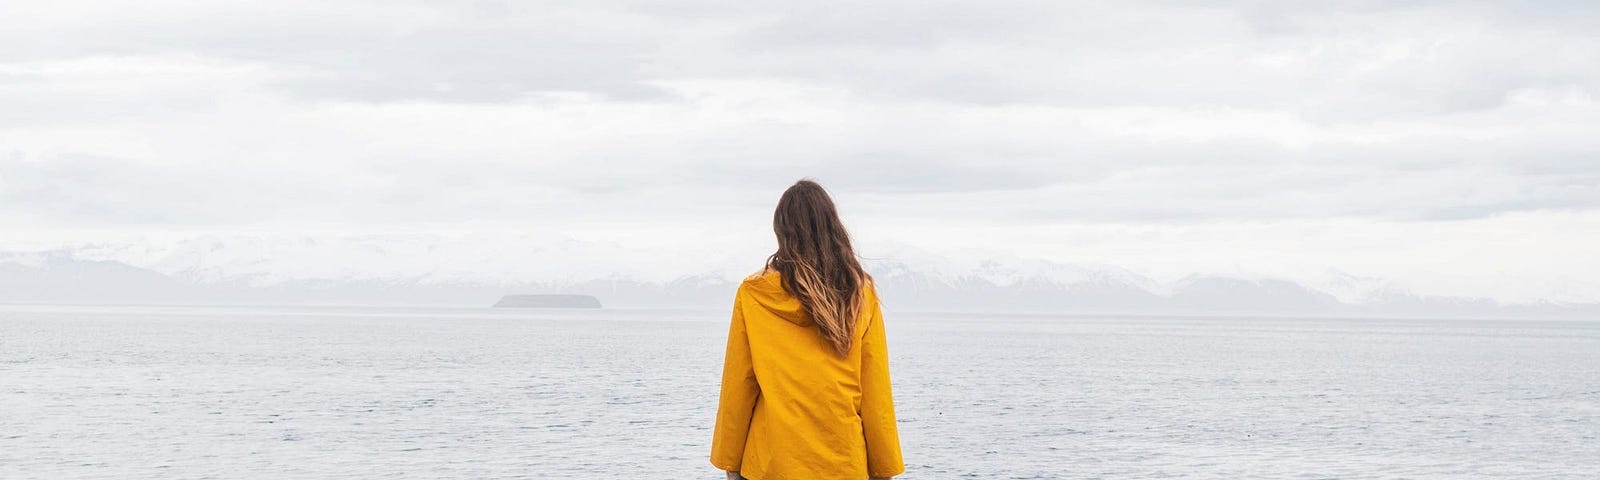 A woman in a yellow coat looking over out into a body of water.